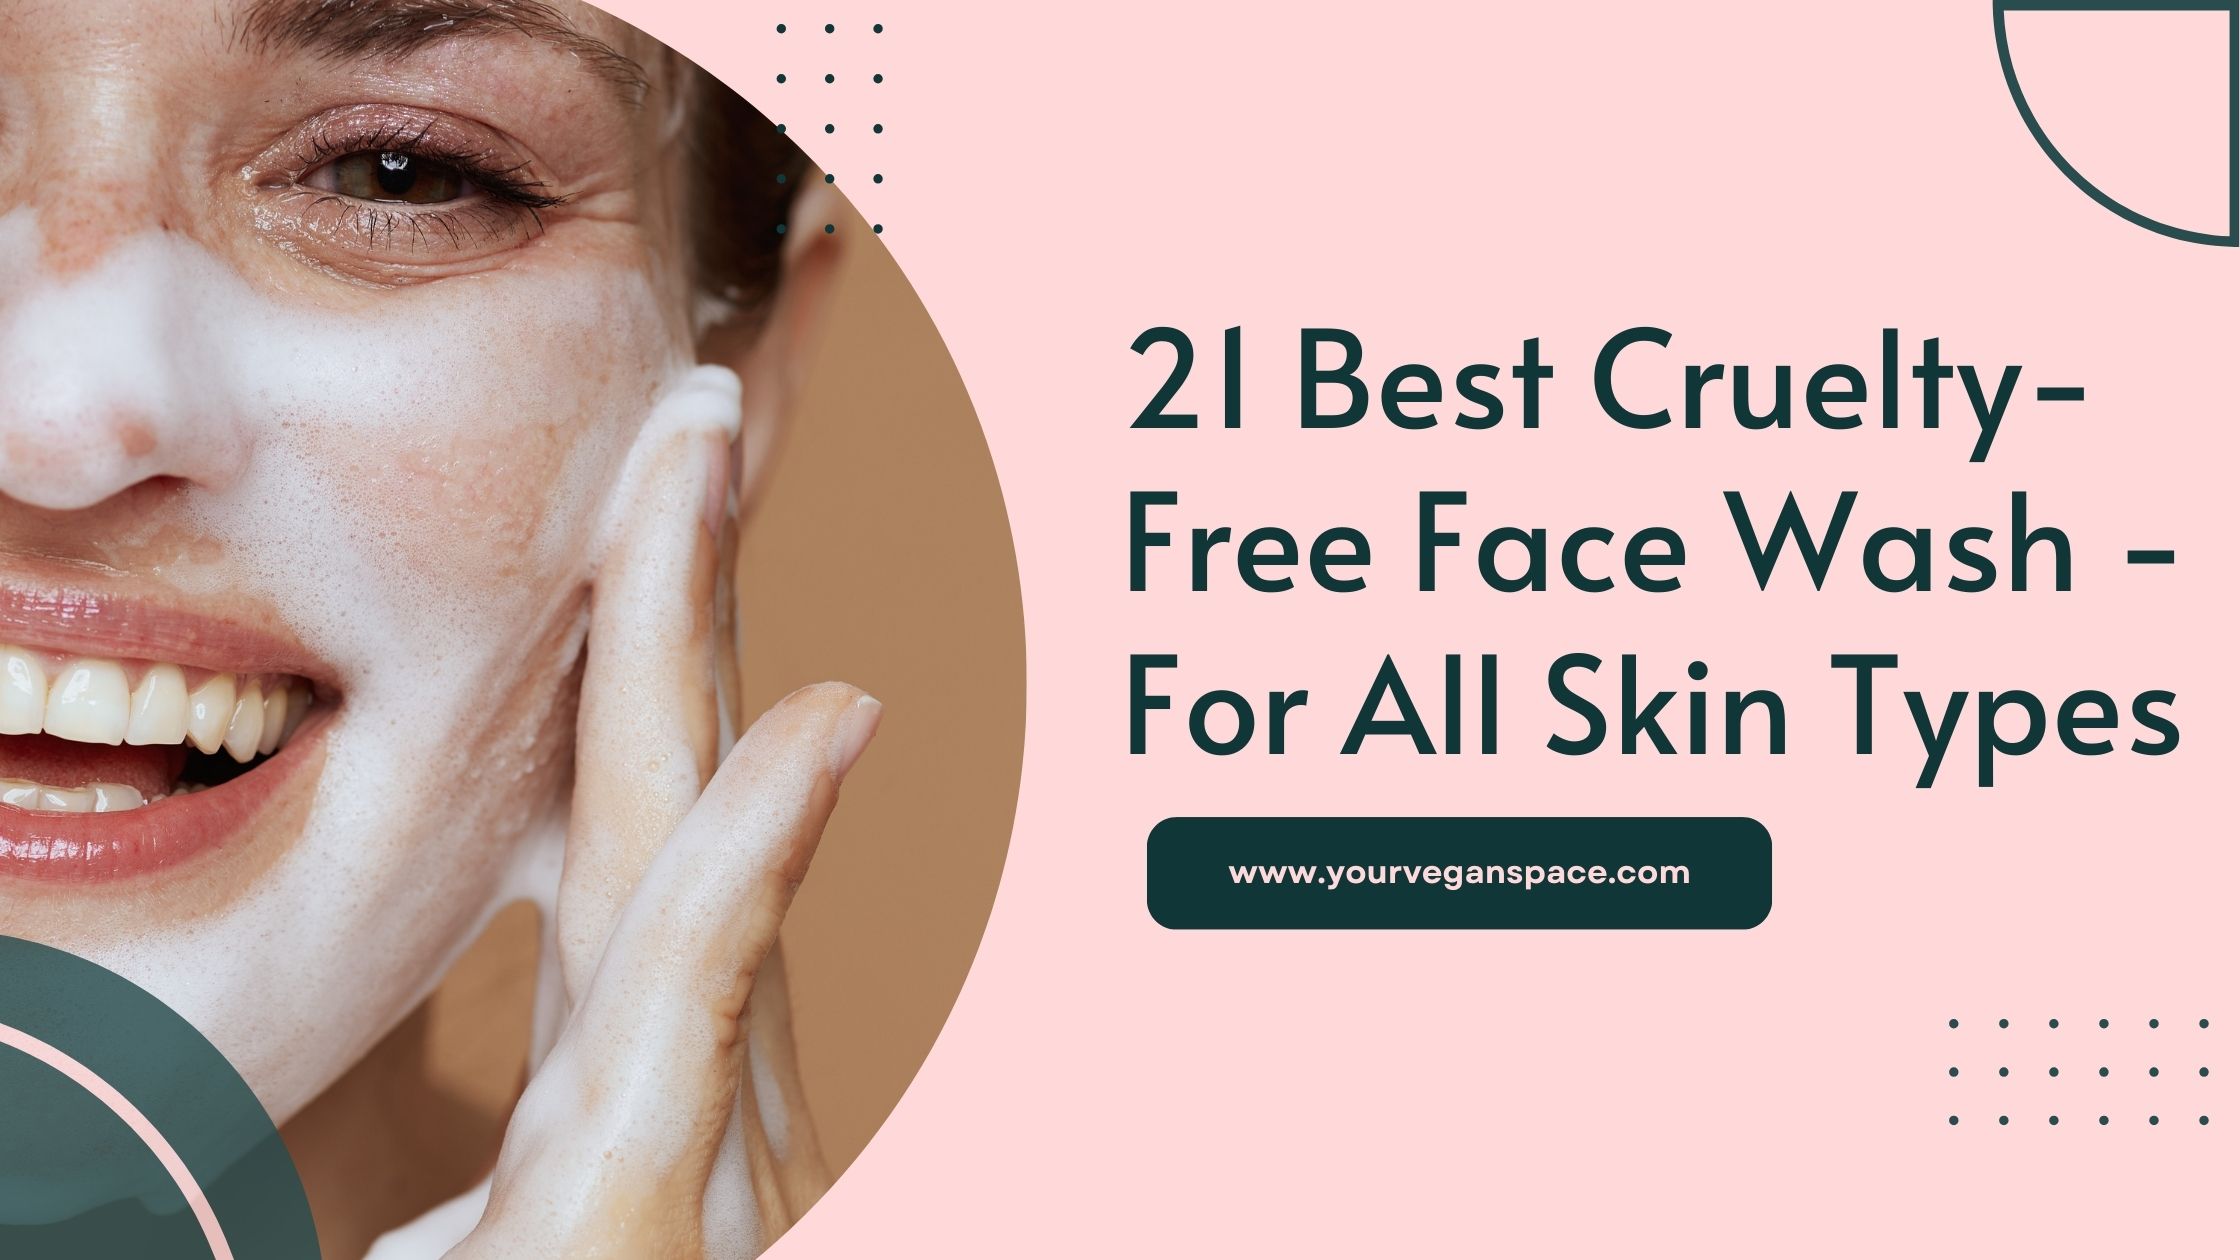 21 Best Cruelty-Free Face Wash - For All Skin Types